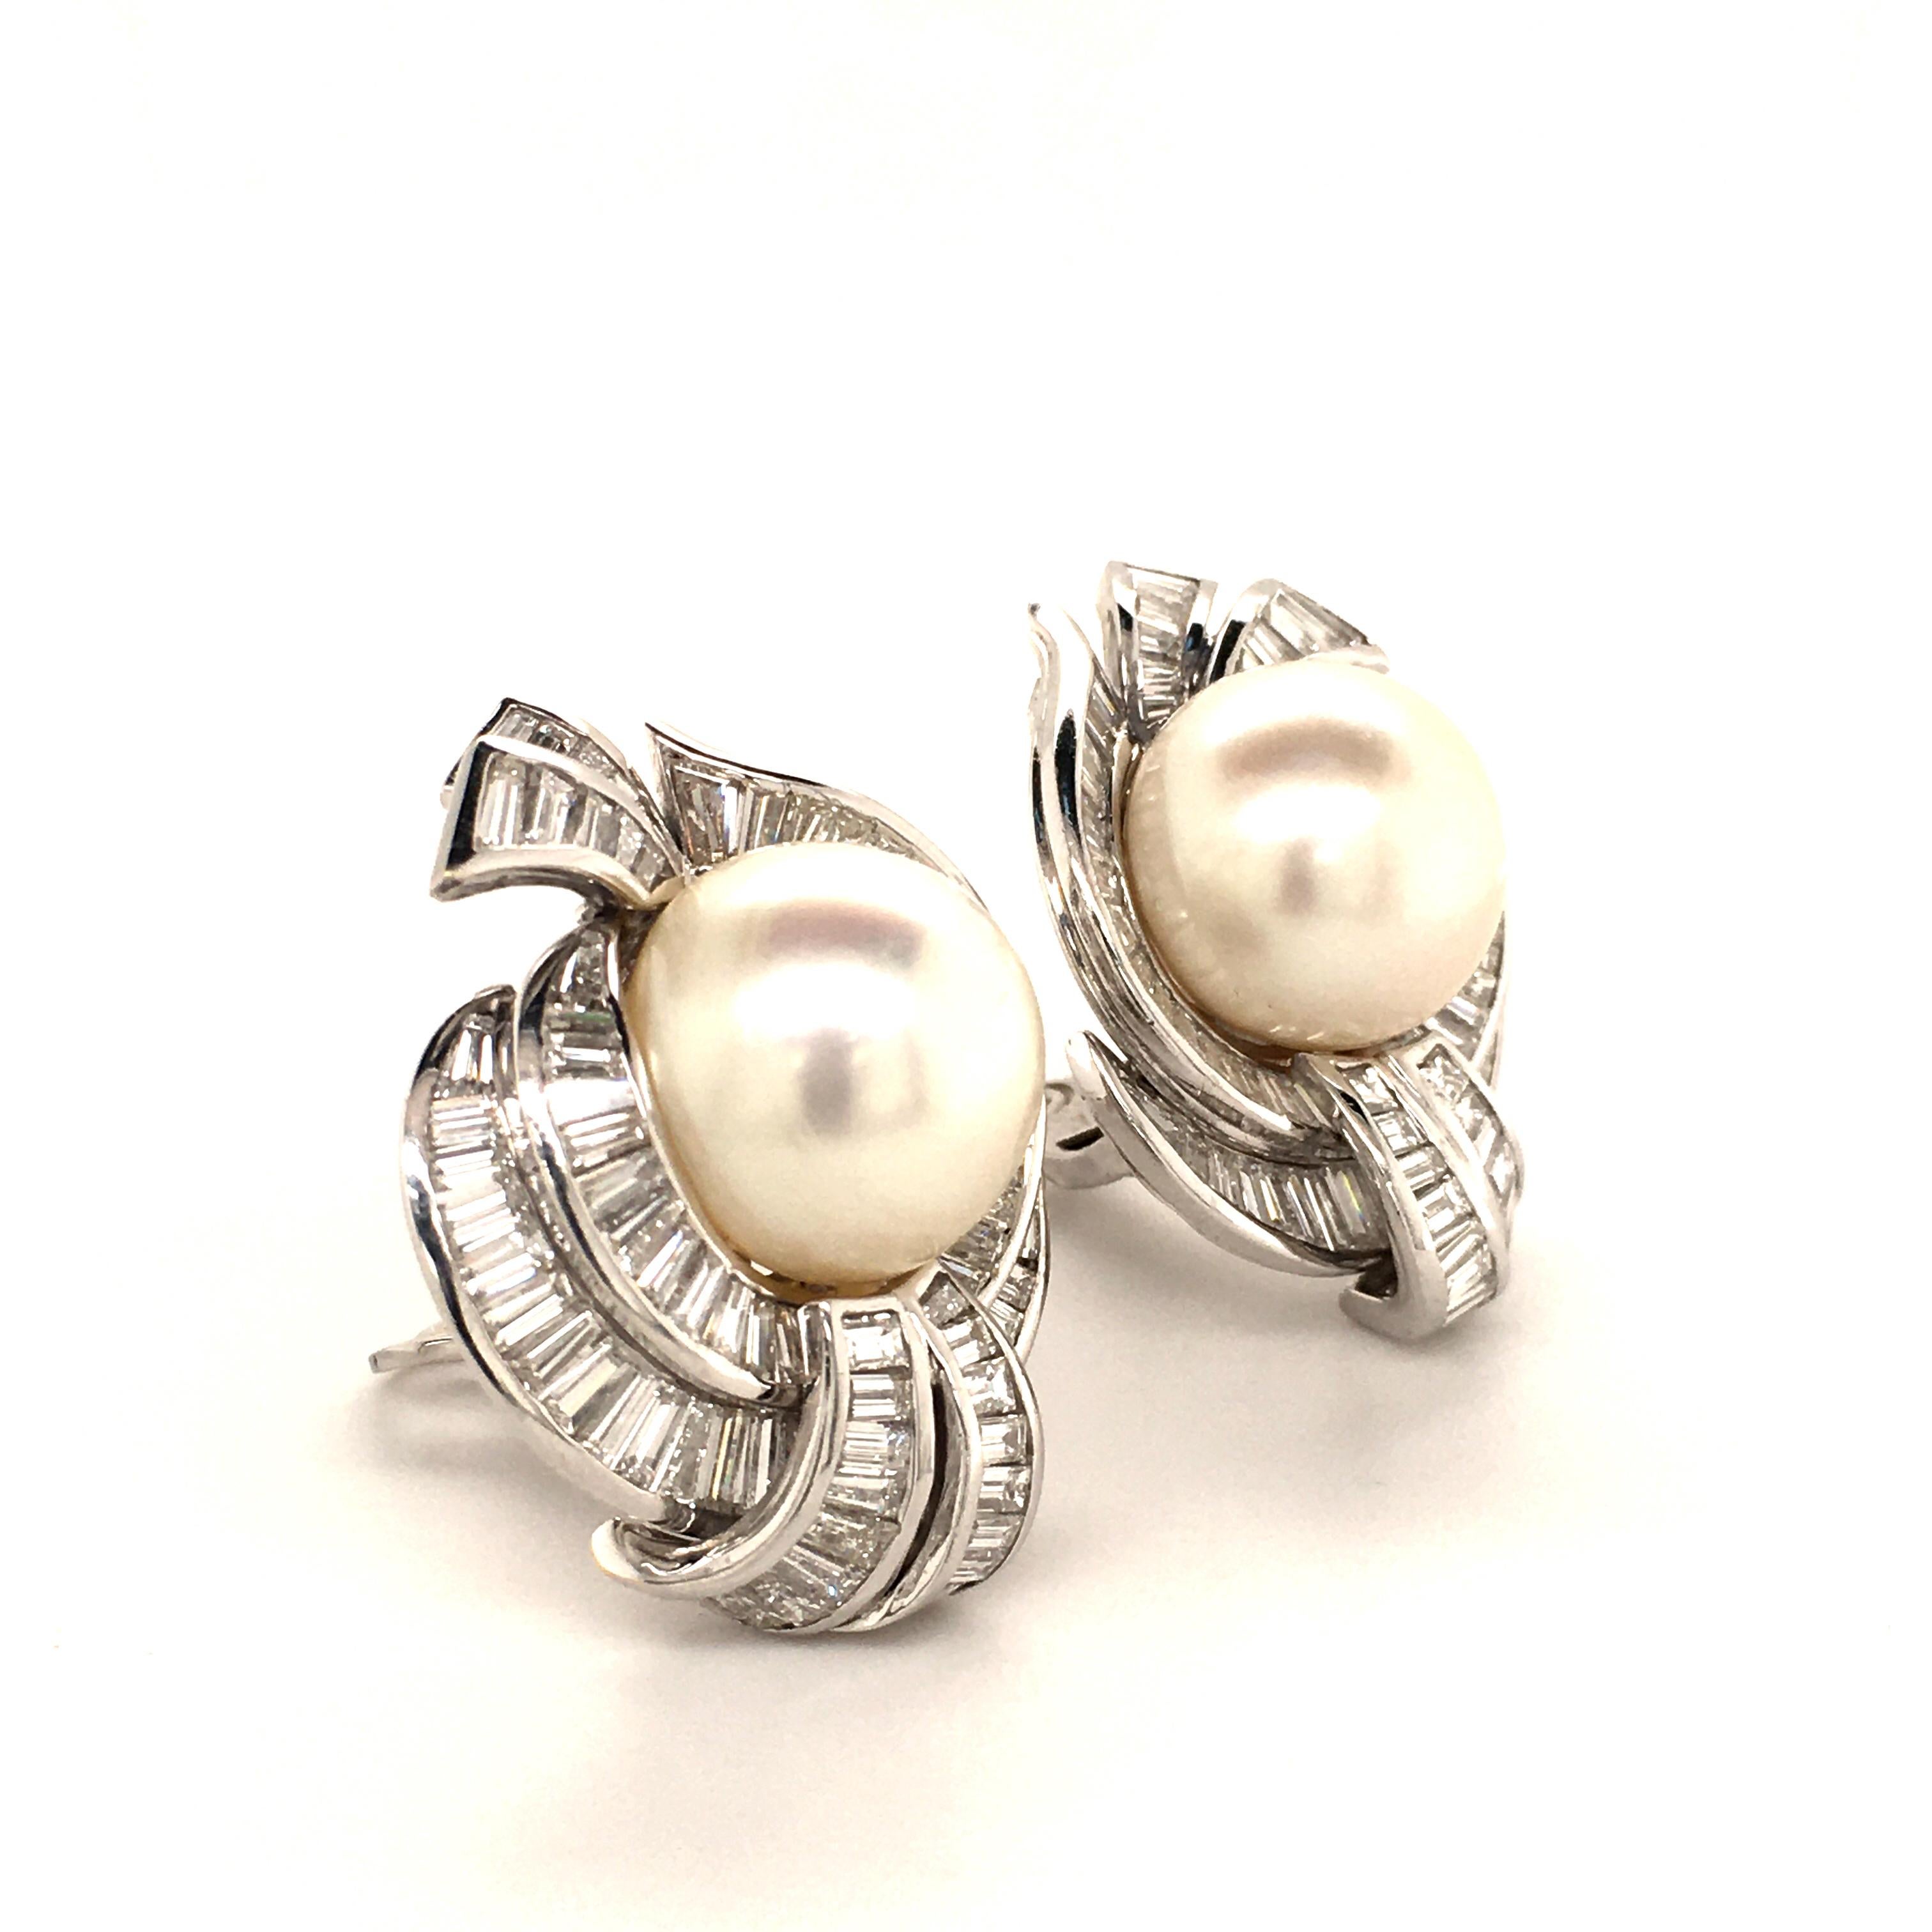 What a show! Spectacular pair of Cultured South Sea Pearls of 16 mm in diameter. Slightly button shaped, white and with a great luster. Double entourage of 12 carats in baguette- and tapered-cut diamonds placed in a channel setting. Interrupted by